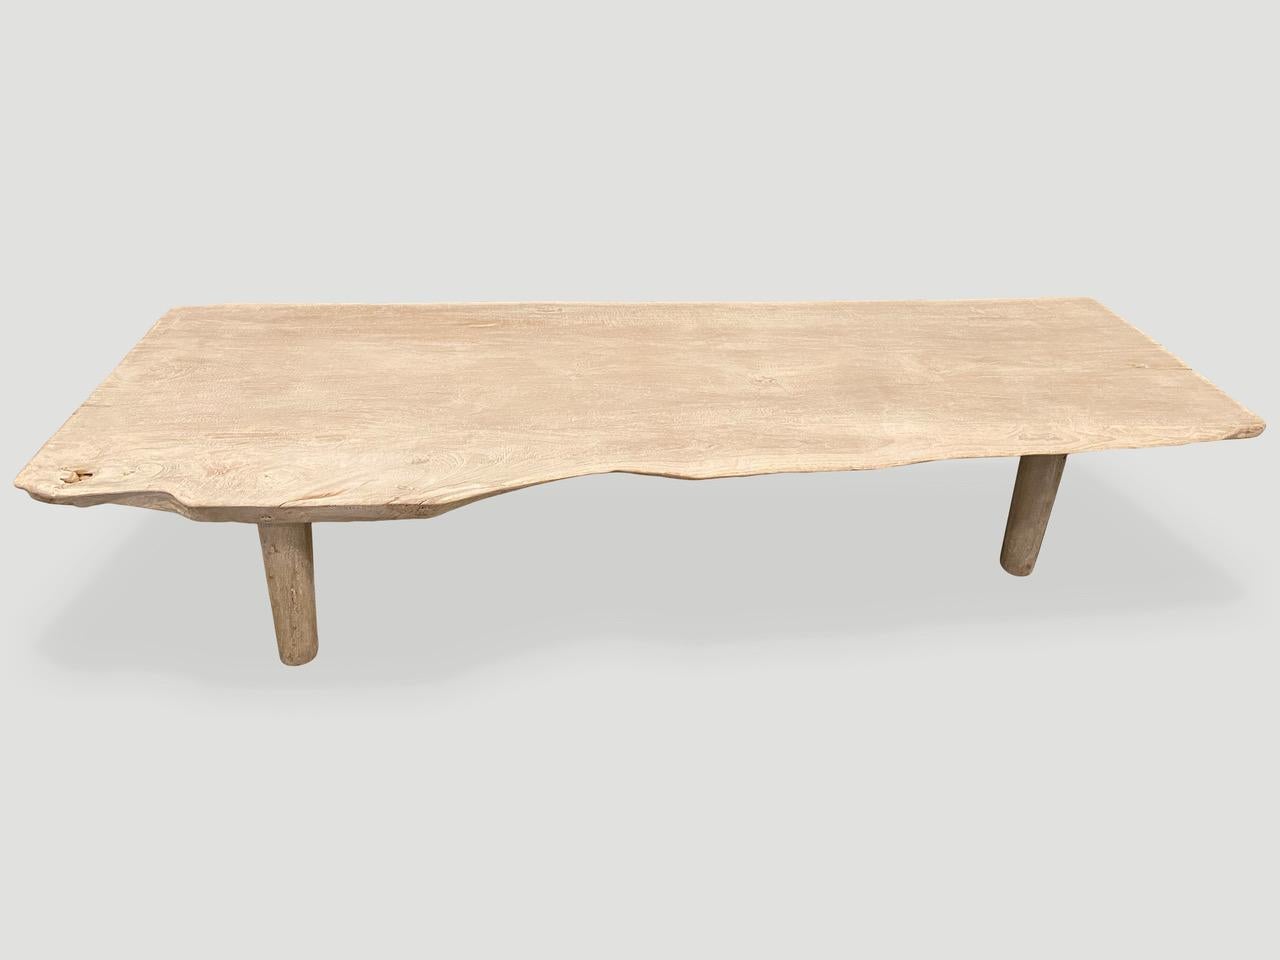 Andrianna Shamaris White Washed Live Edge Teak Wood Coffee Table or Bench For Sale 1